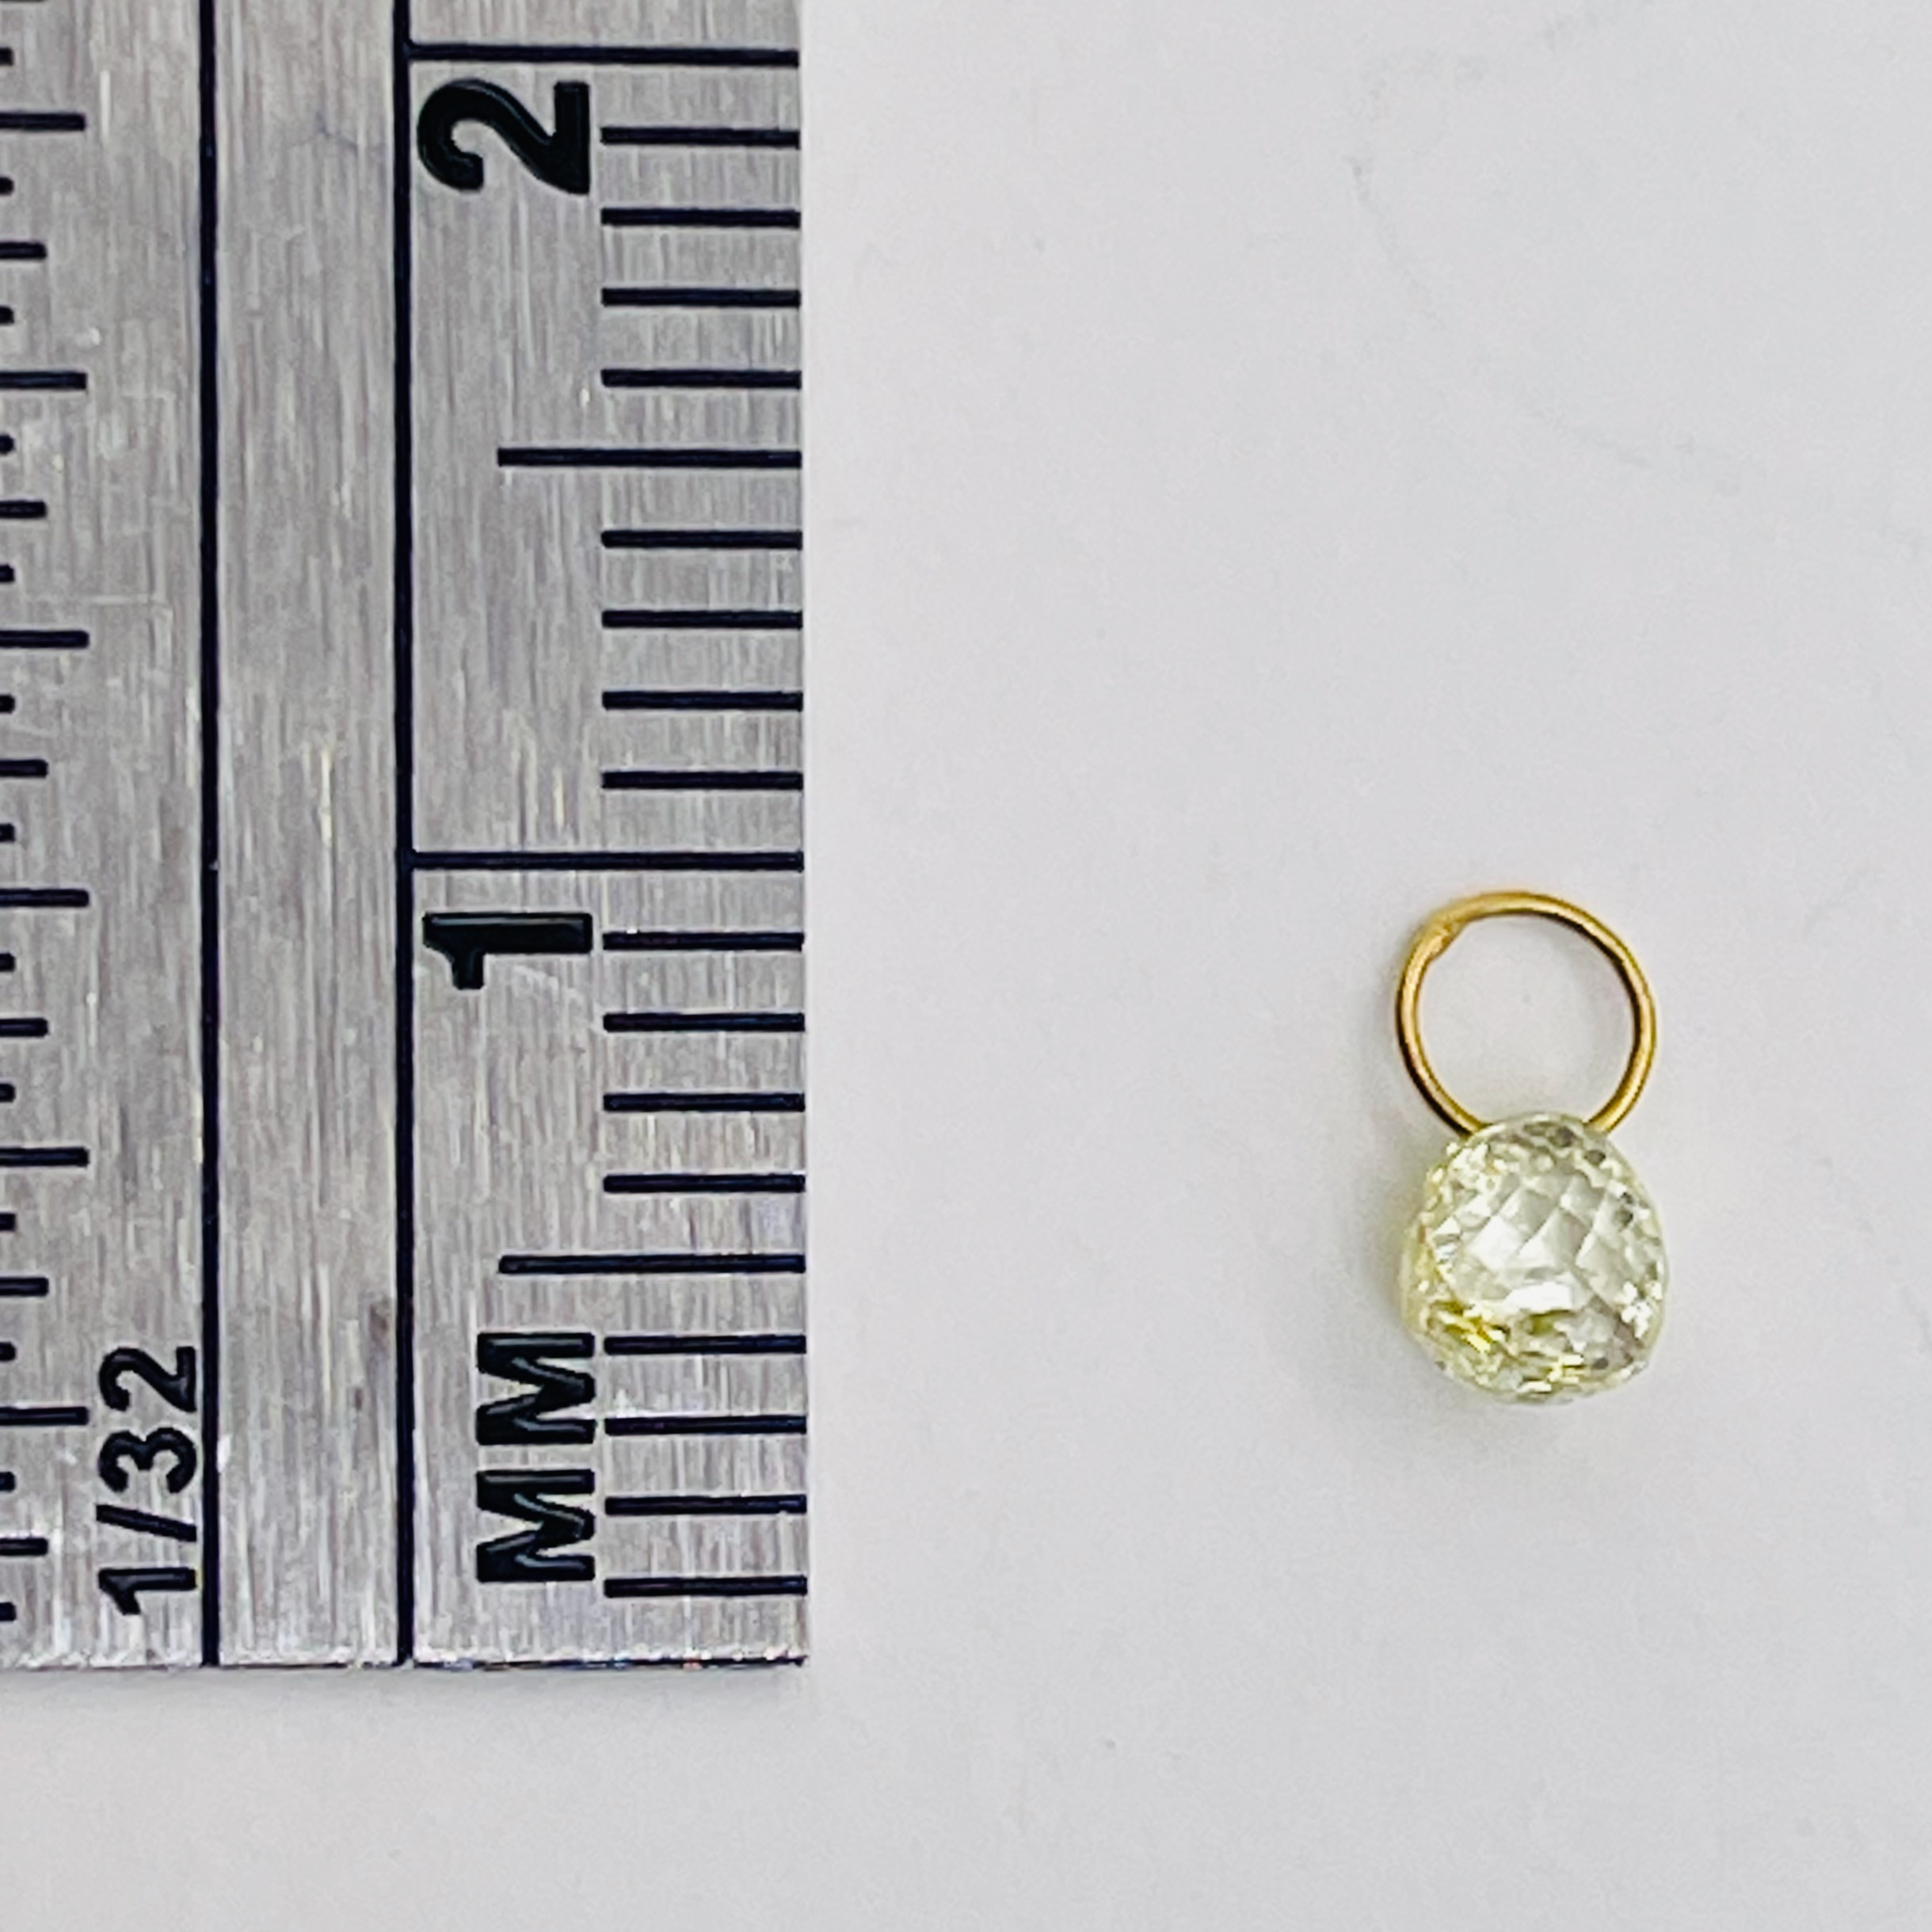 0.39cts Natural Canary Diamond 18K Gold Pendant | 4x3.25x2.75mm | - image 5 of 12